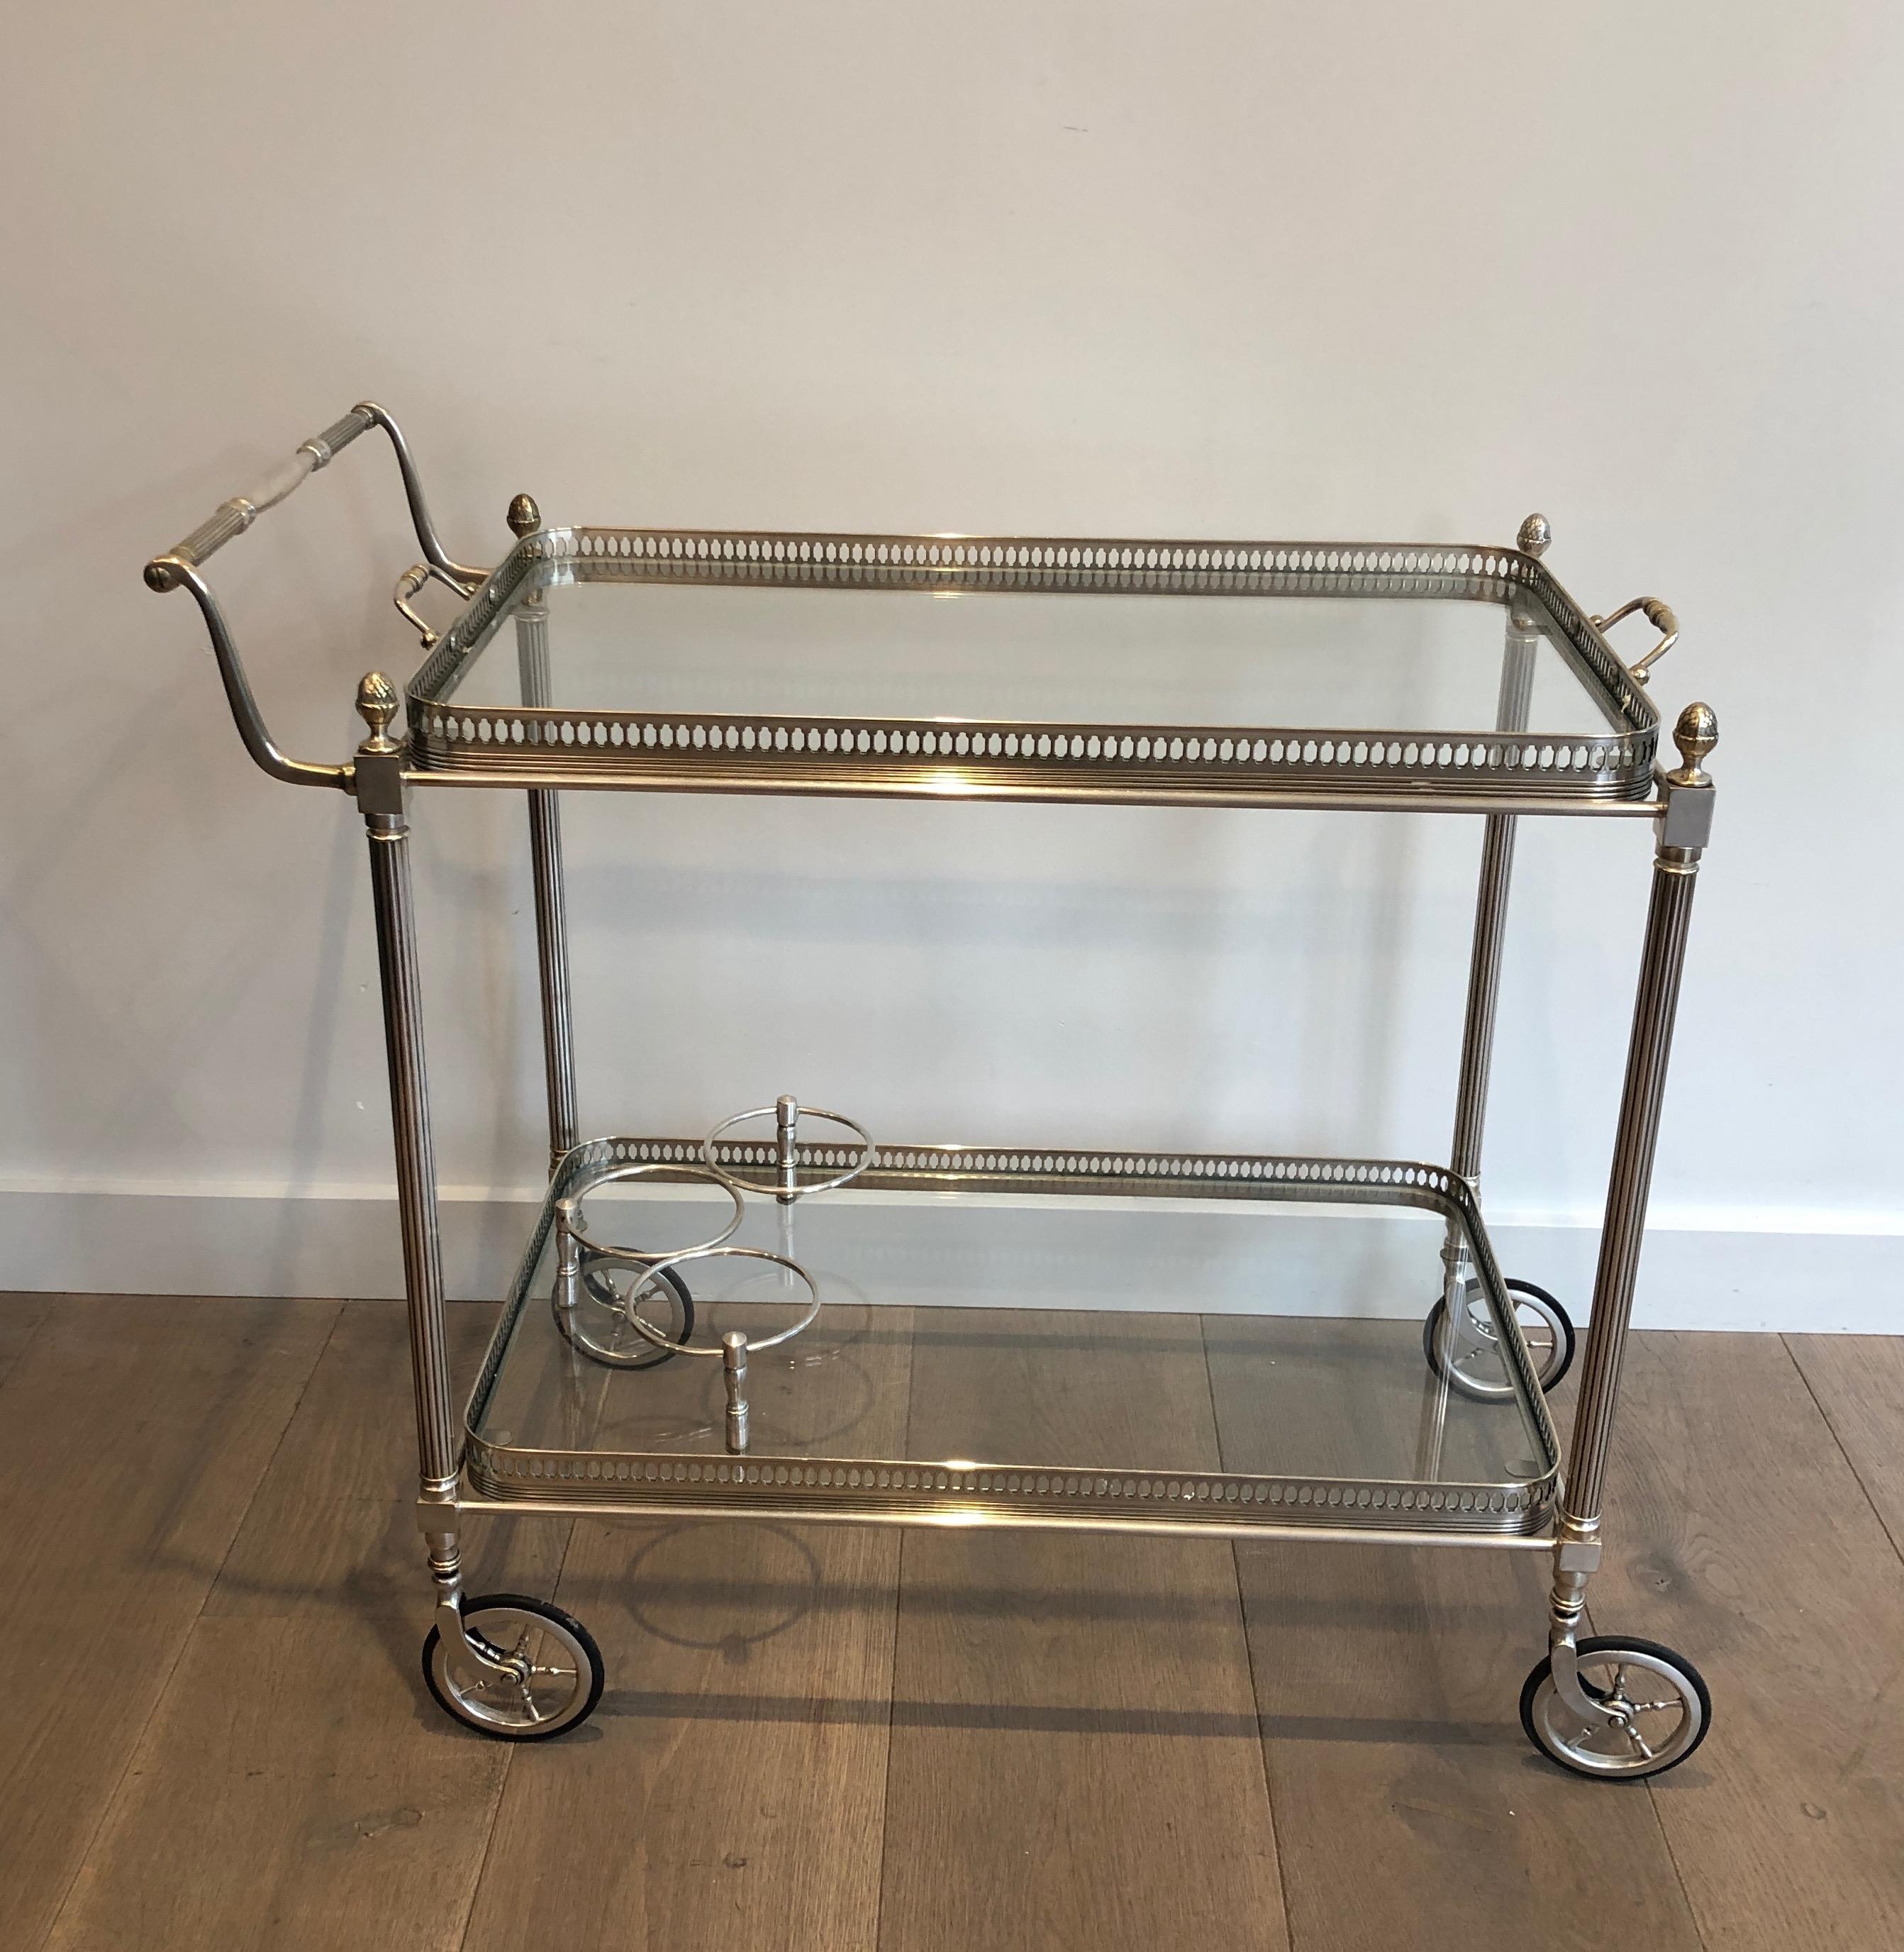 This very nice neoclassical drinks trolley is made of silvered on brass with removable tray. This is a work by famous French designer Maison Jansen, circa 1940.